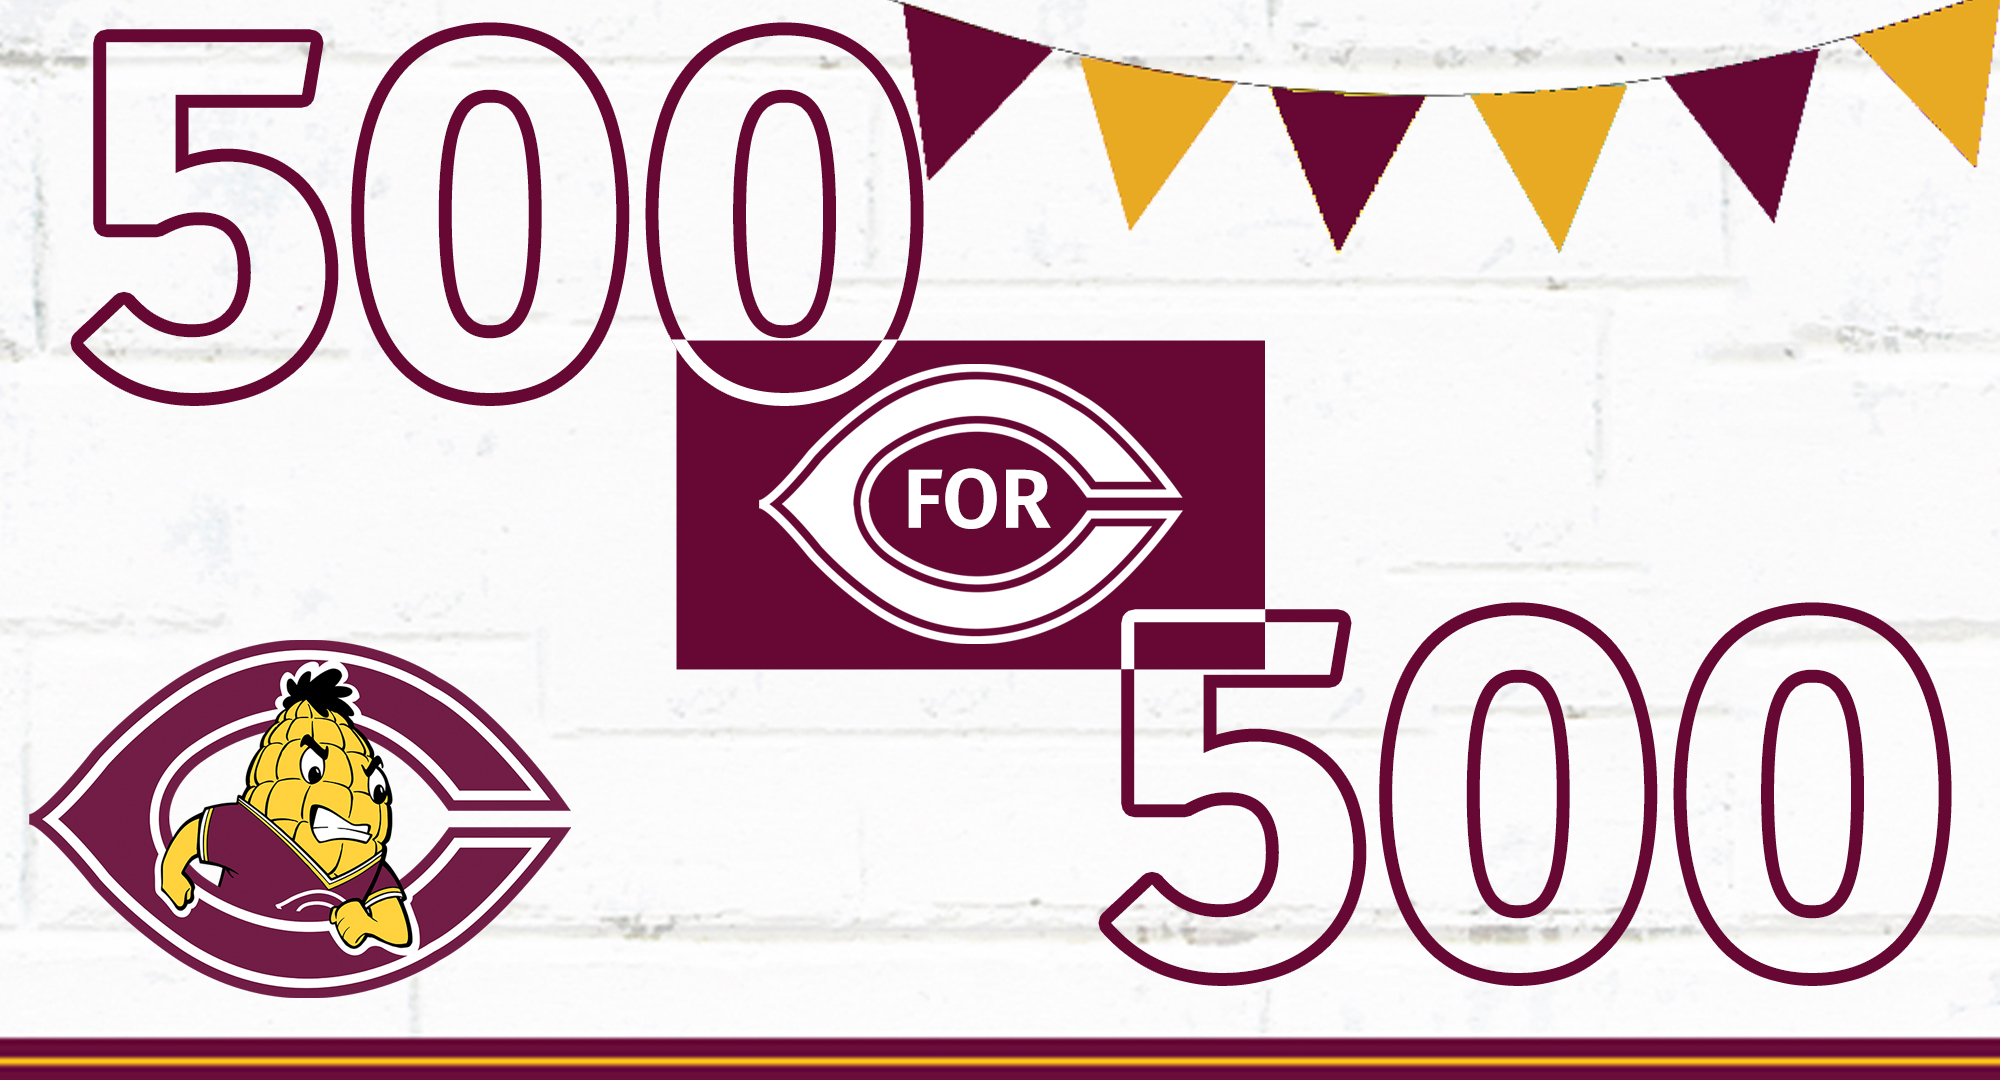 The 500 for 500 fundraising campaign has a goal of getting 500 donors to give to the Concordia athletic department for the over 500 student athletes.